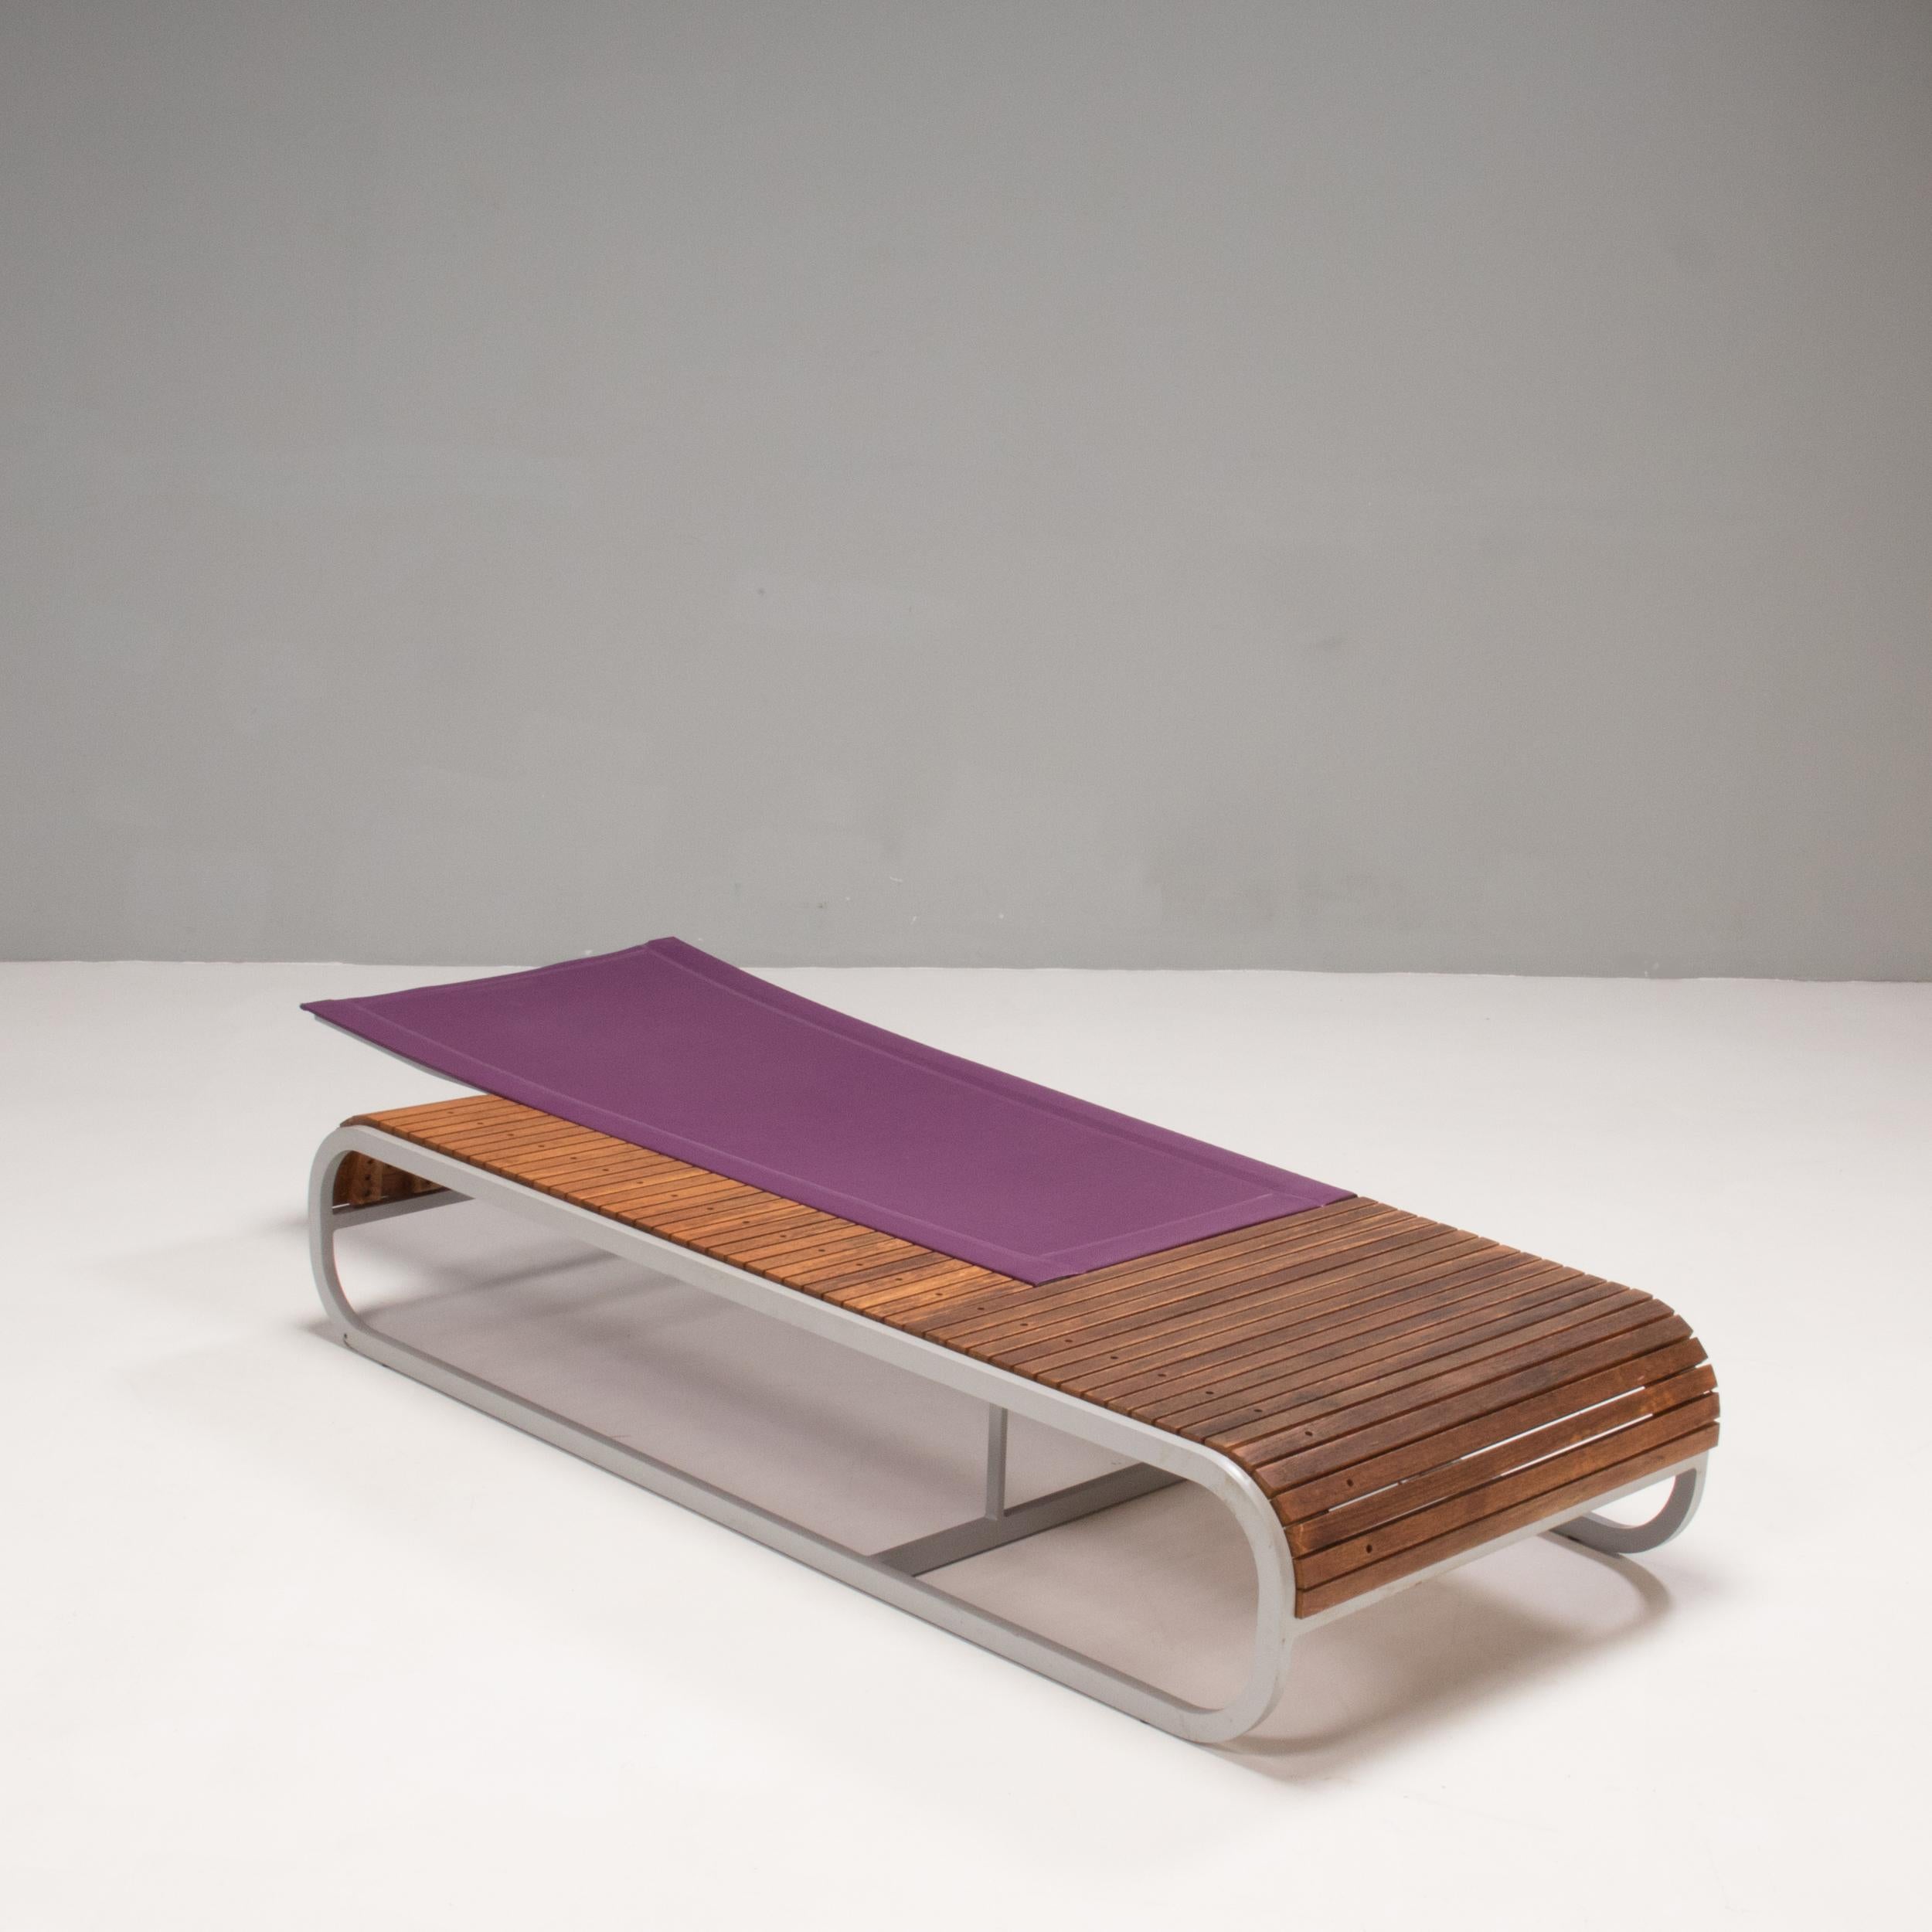 Designed by Thomas Sauvage for EGO Paris, the Tandem sun lounger was awarded the Red Dot design award in 2008.

Constructed from a thermo-lacquered aluminum frame, the sun lounger features a wooden deck surround, with a purple mesh backrest which